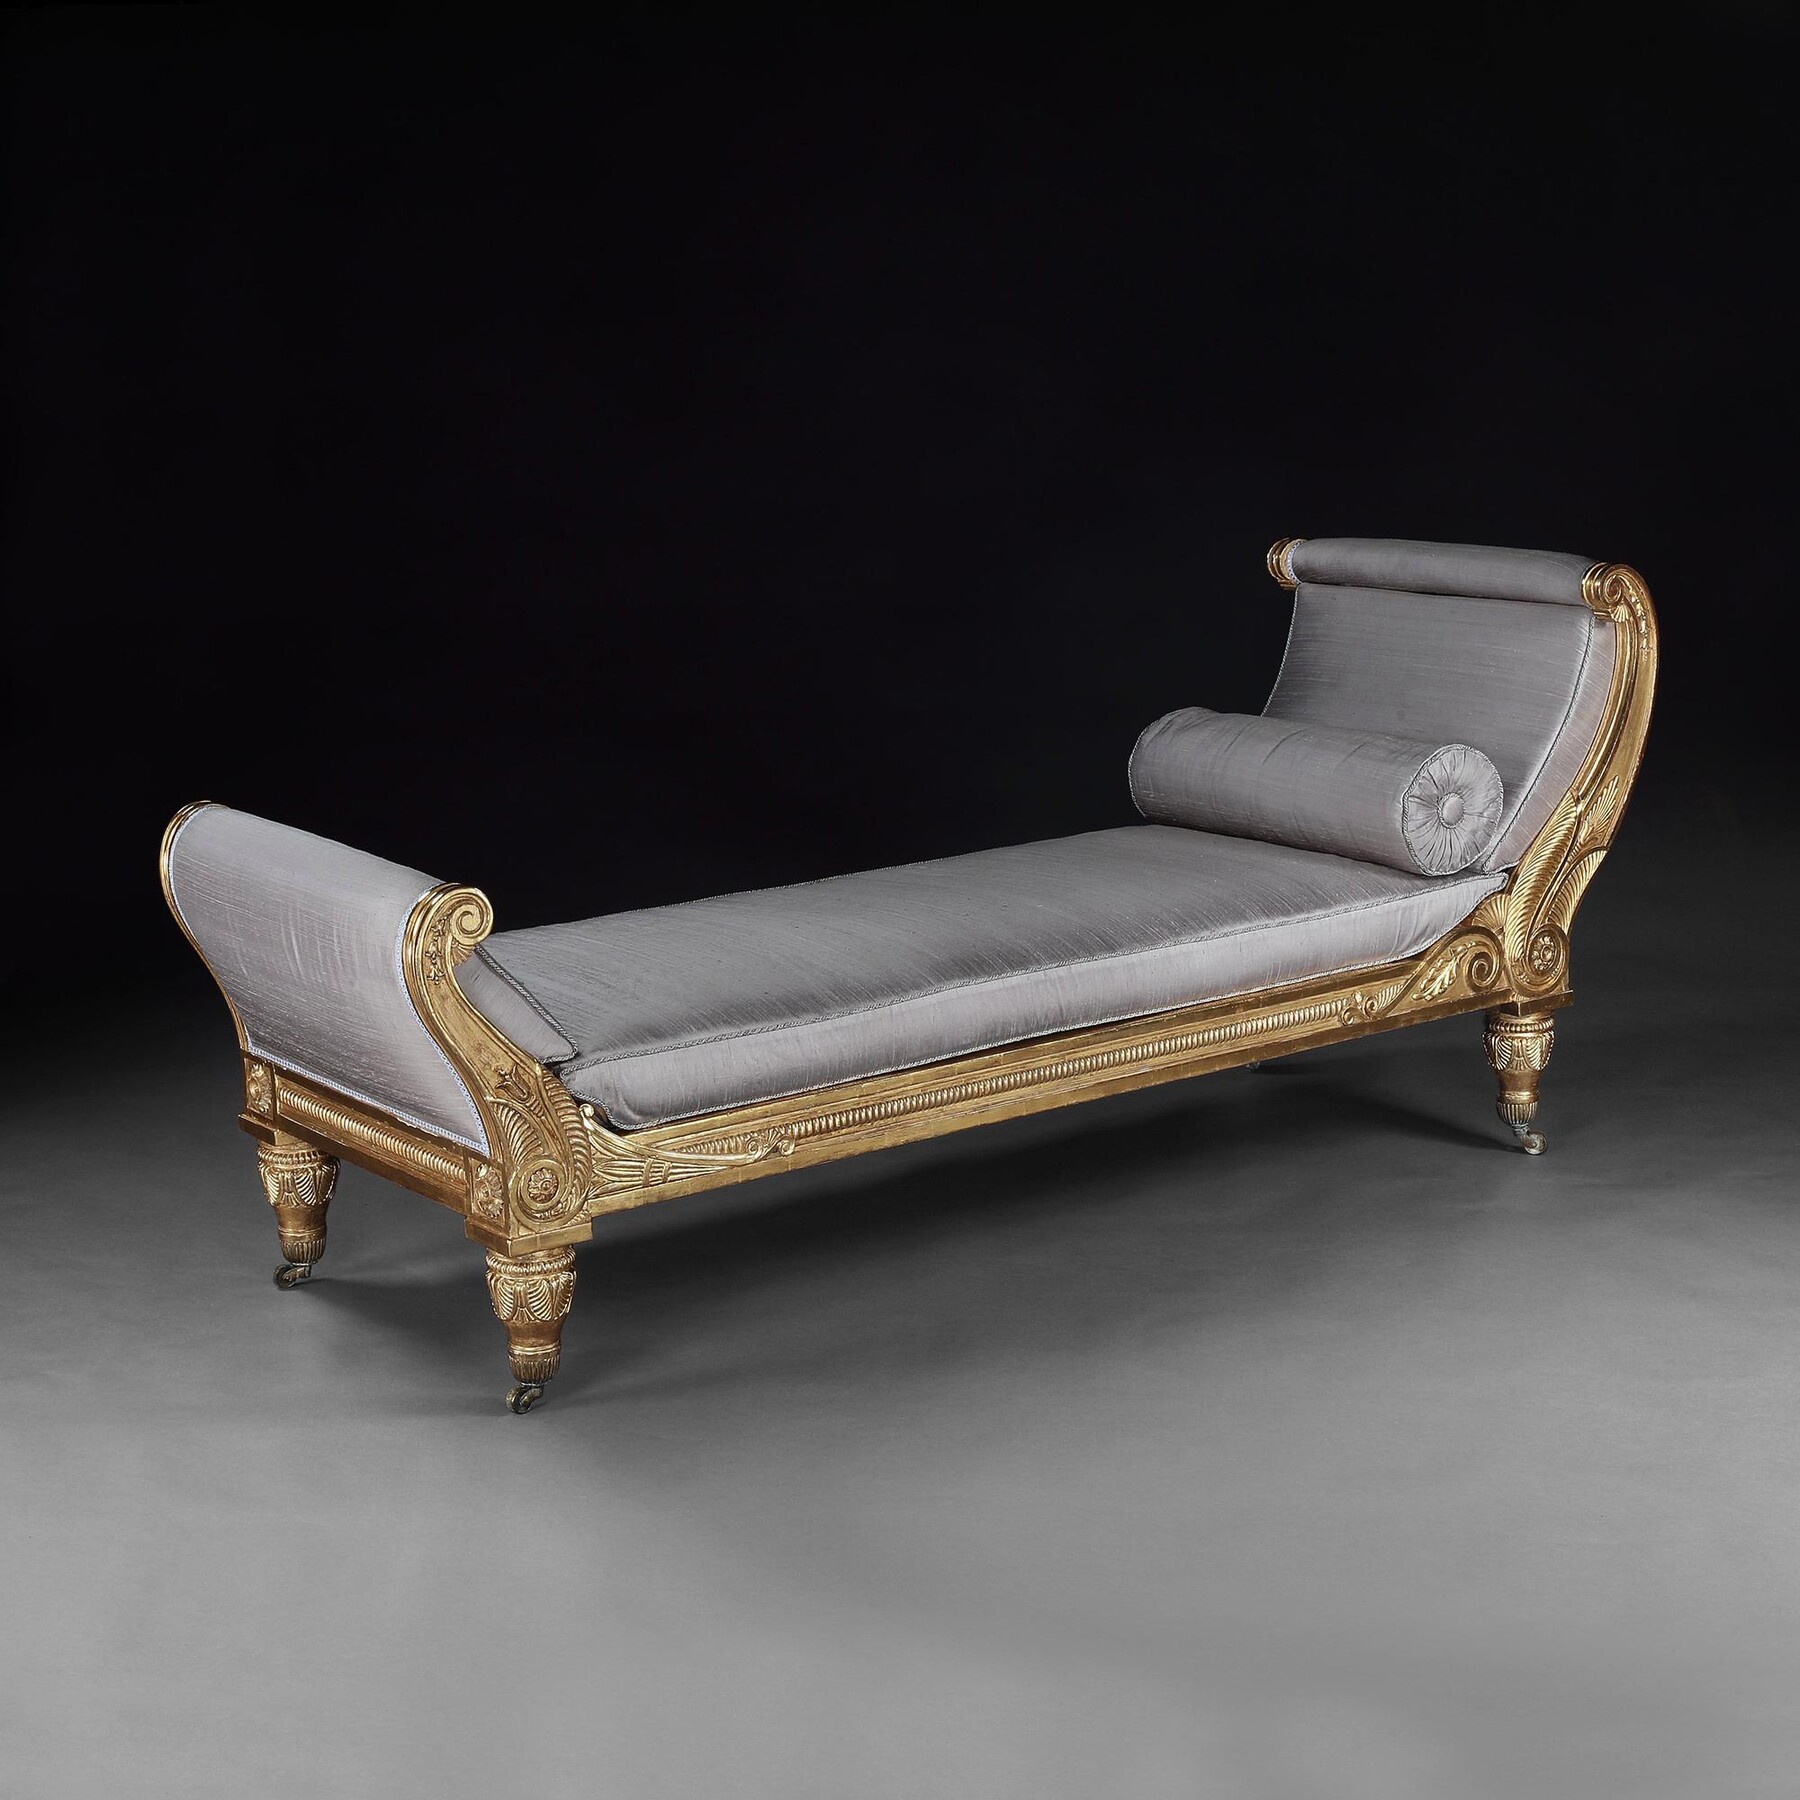 Morel and Hughes Regency Giltwood Daybed Badminton House 